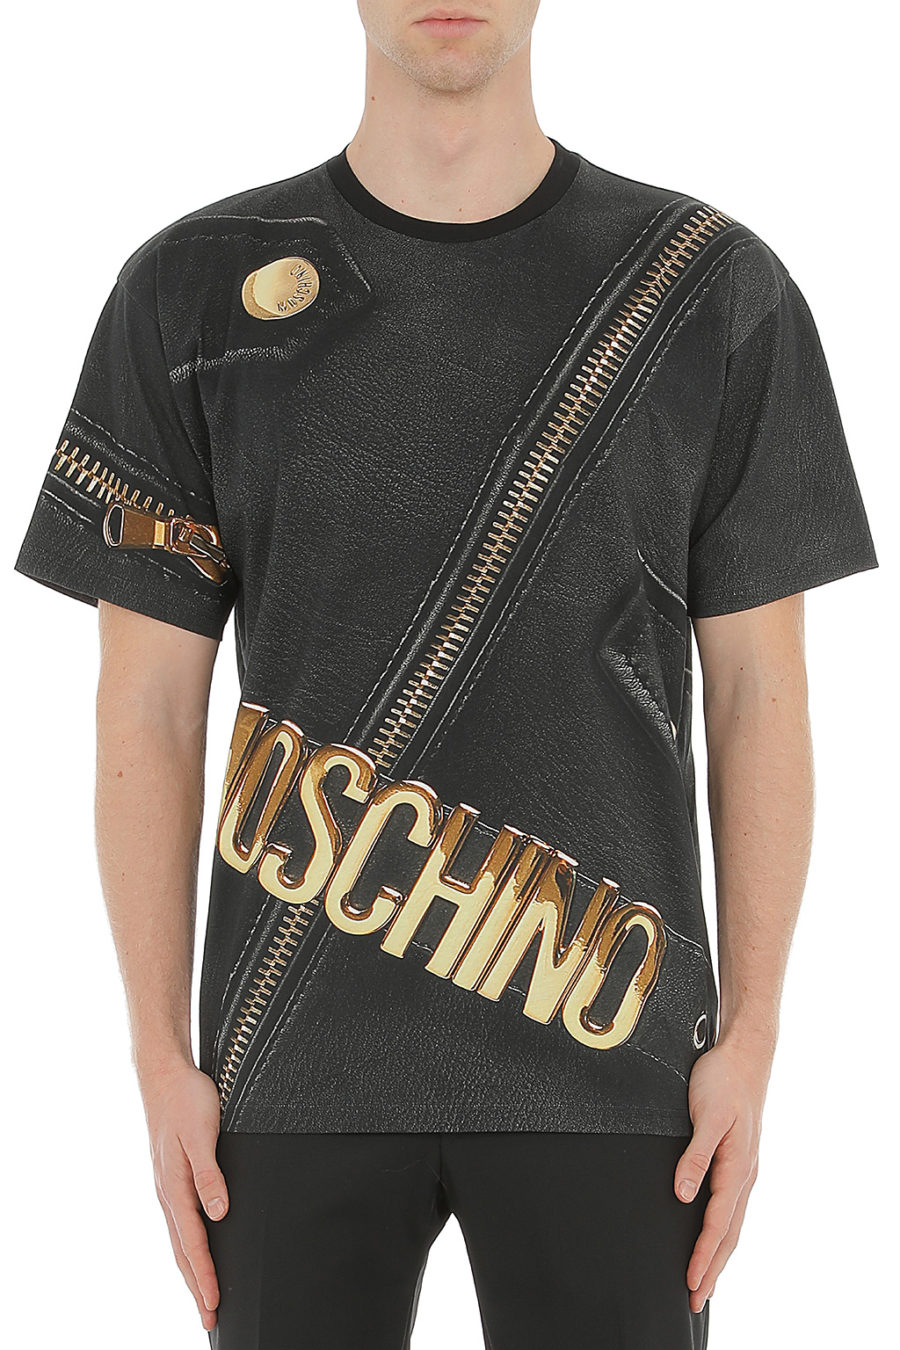 T-shirt Moschino Couture black with gold zip - 0709 5240 1888